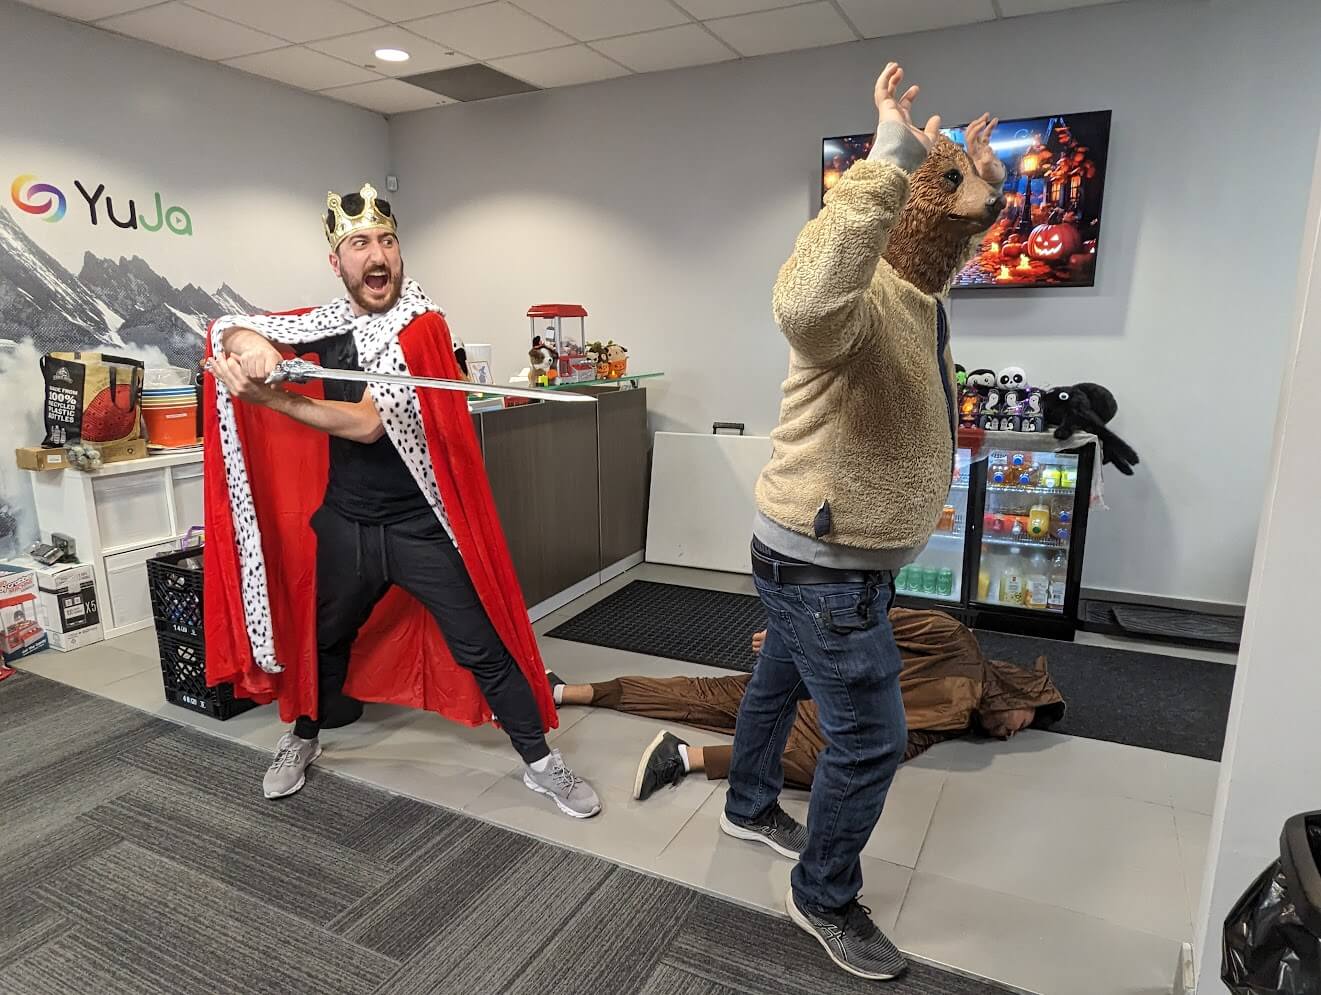 Two team members dressed as a king and bear in the office.